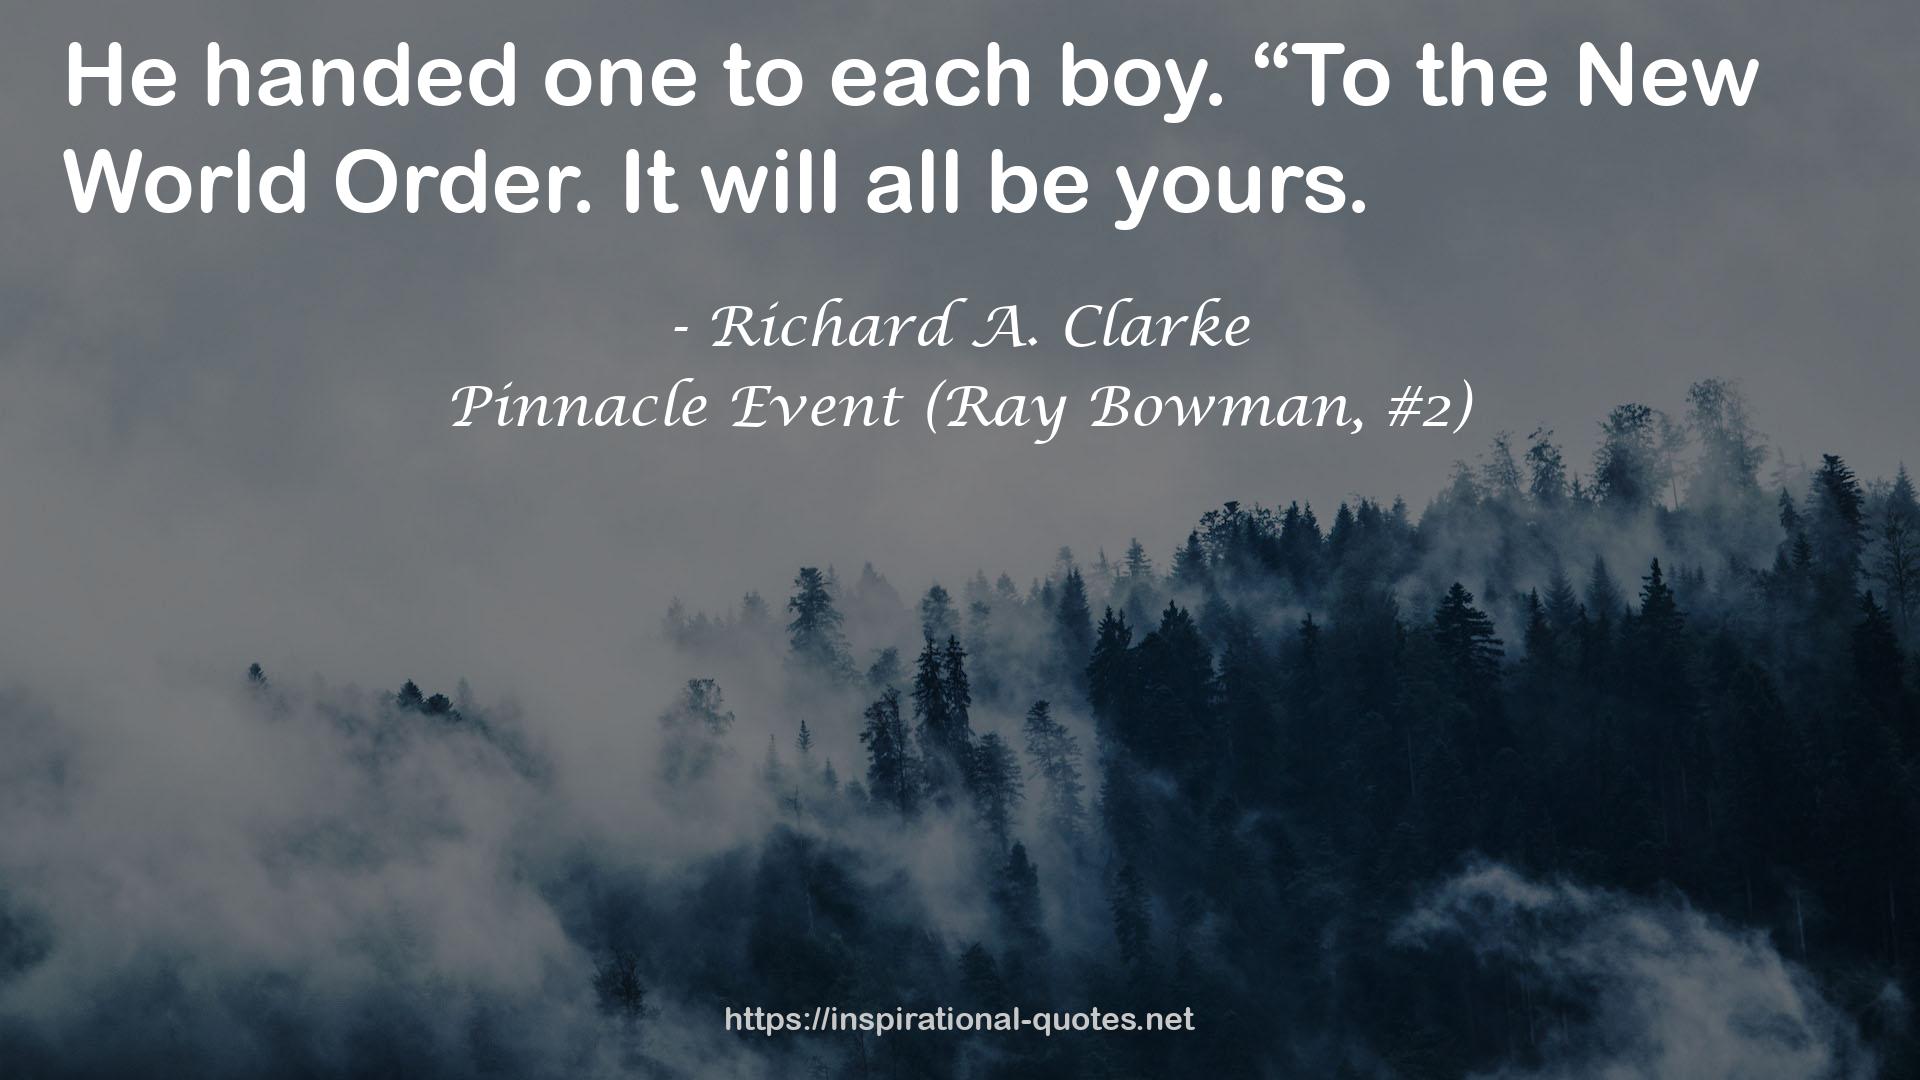 Pinnacle Event (Ray Bowman, #2) QUOTES